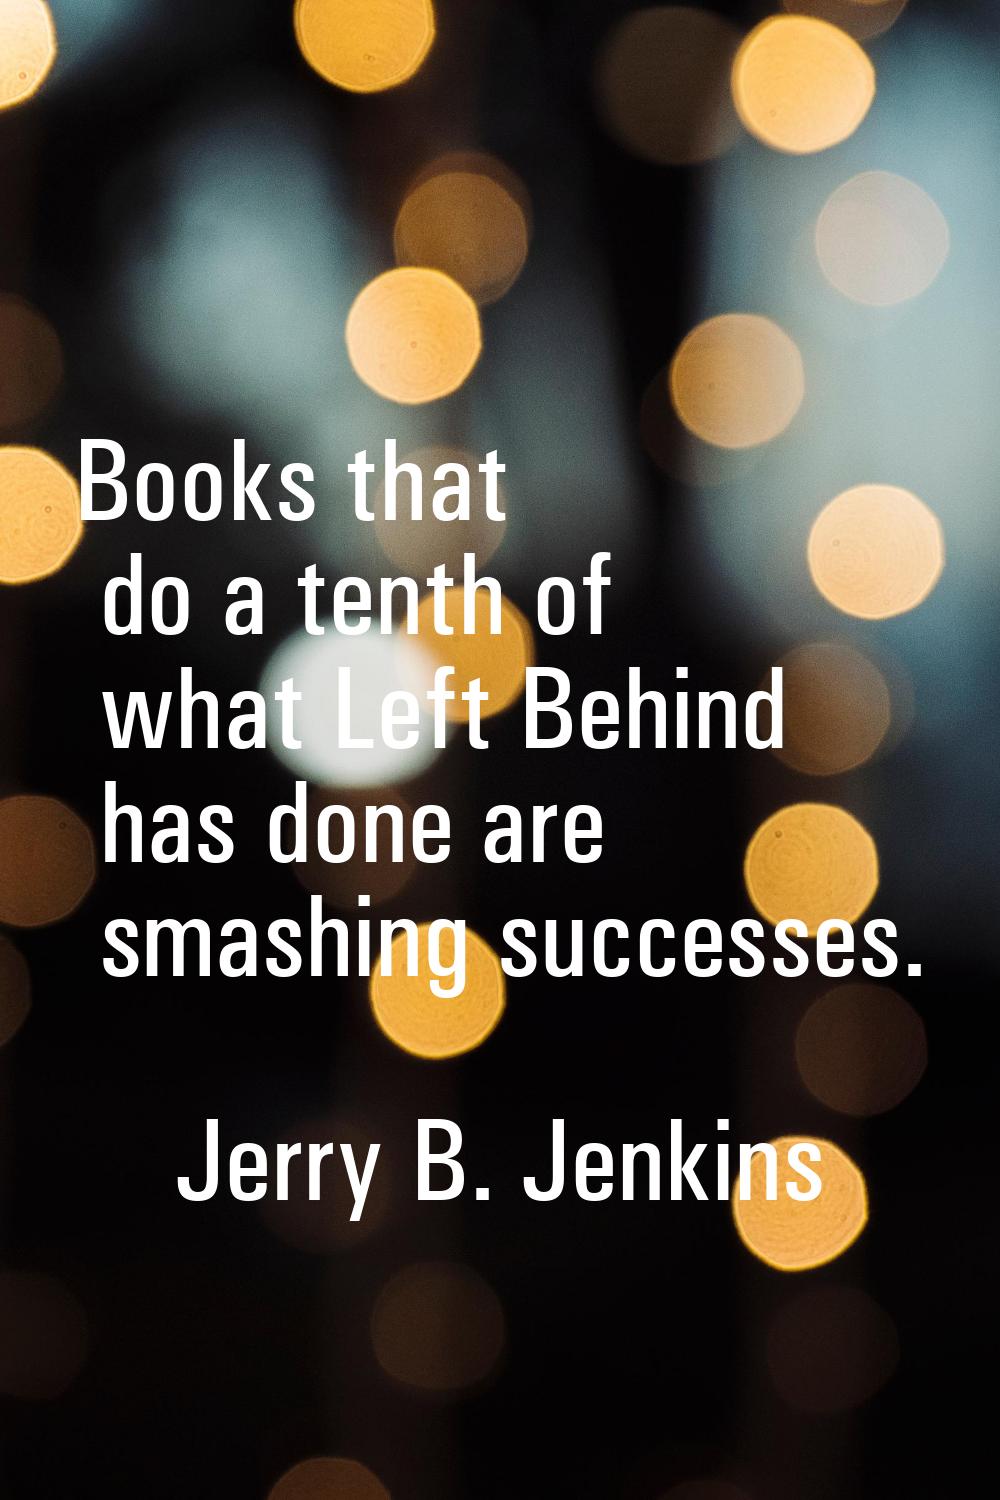 Books that do a tenth of what Left Behind has done are smashing successes.